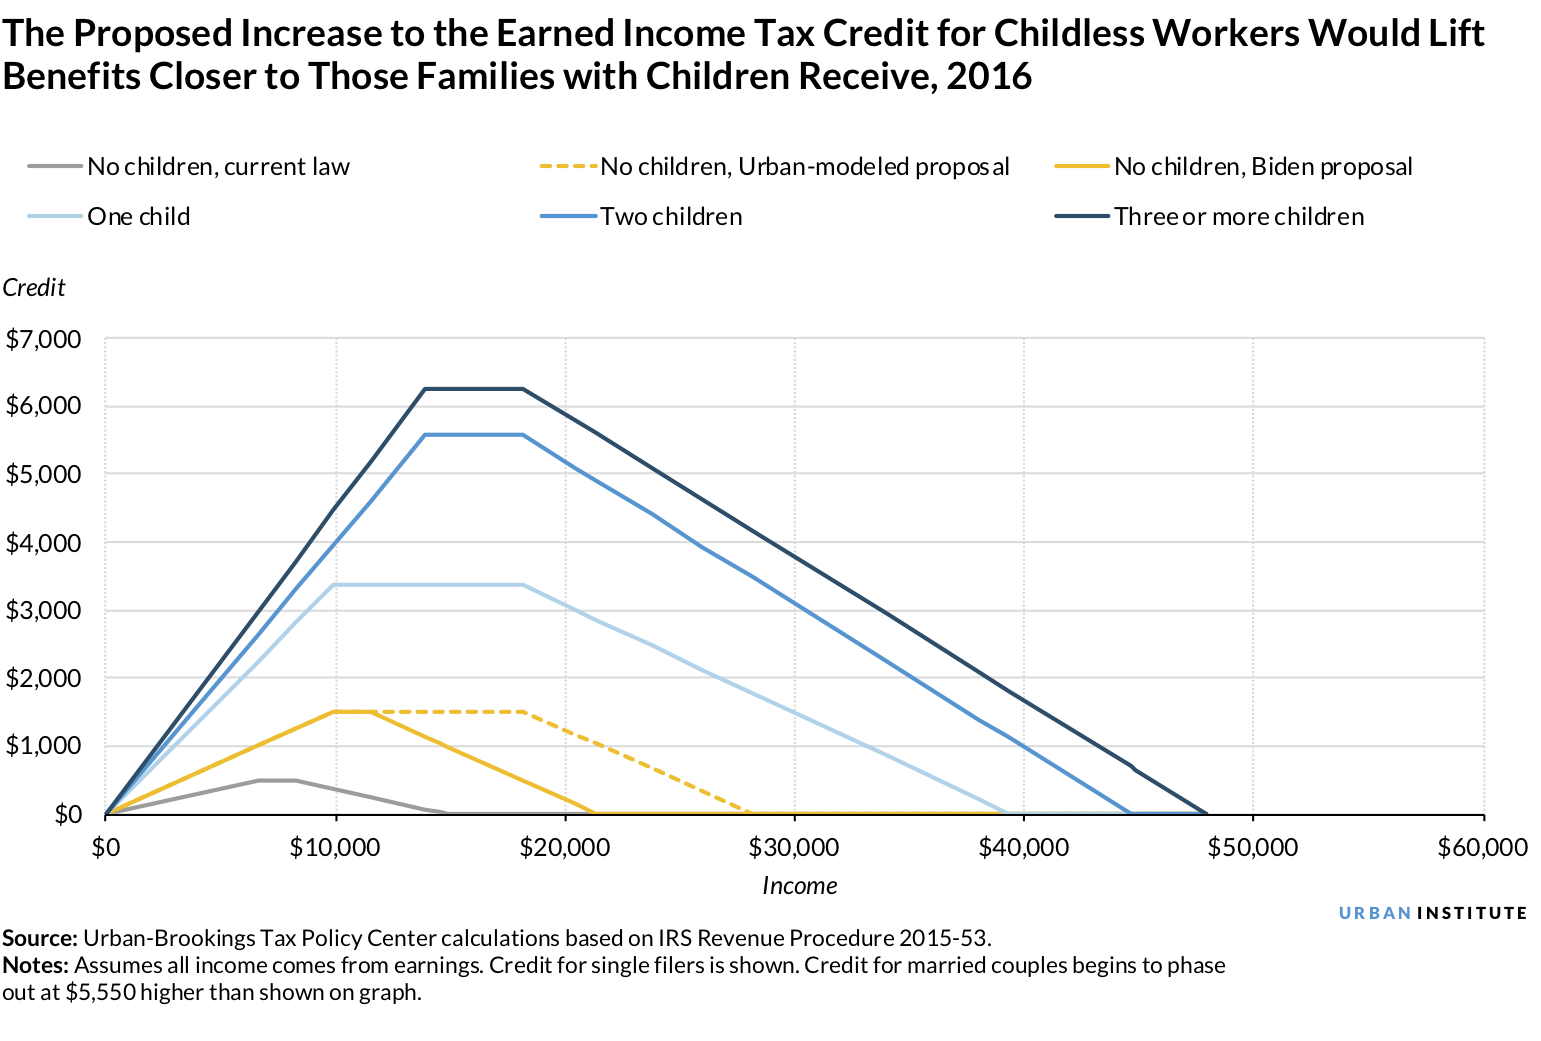 An earned income tax credit for childless workers would increase benefits